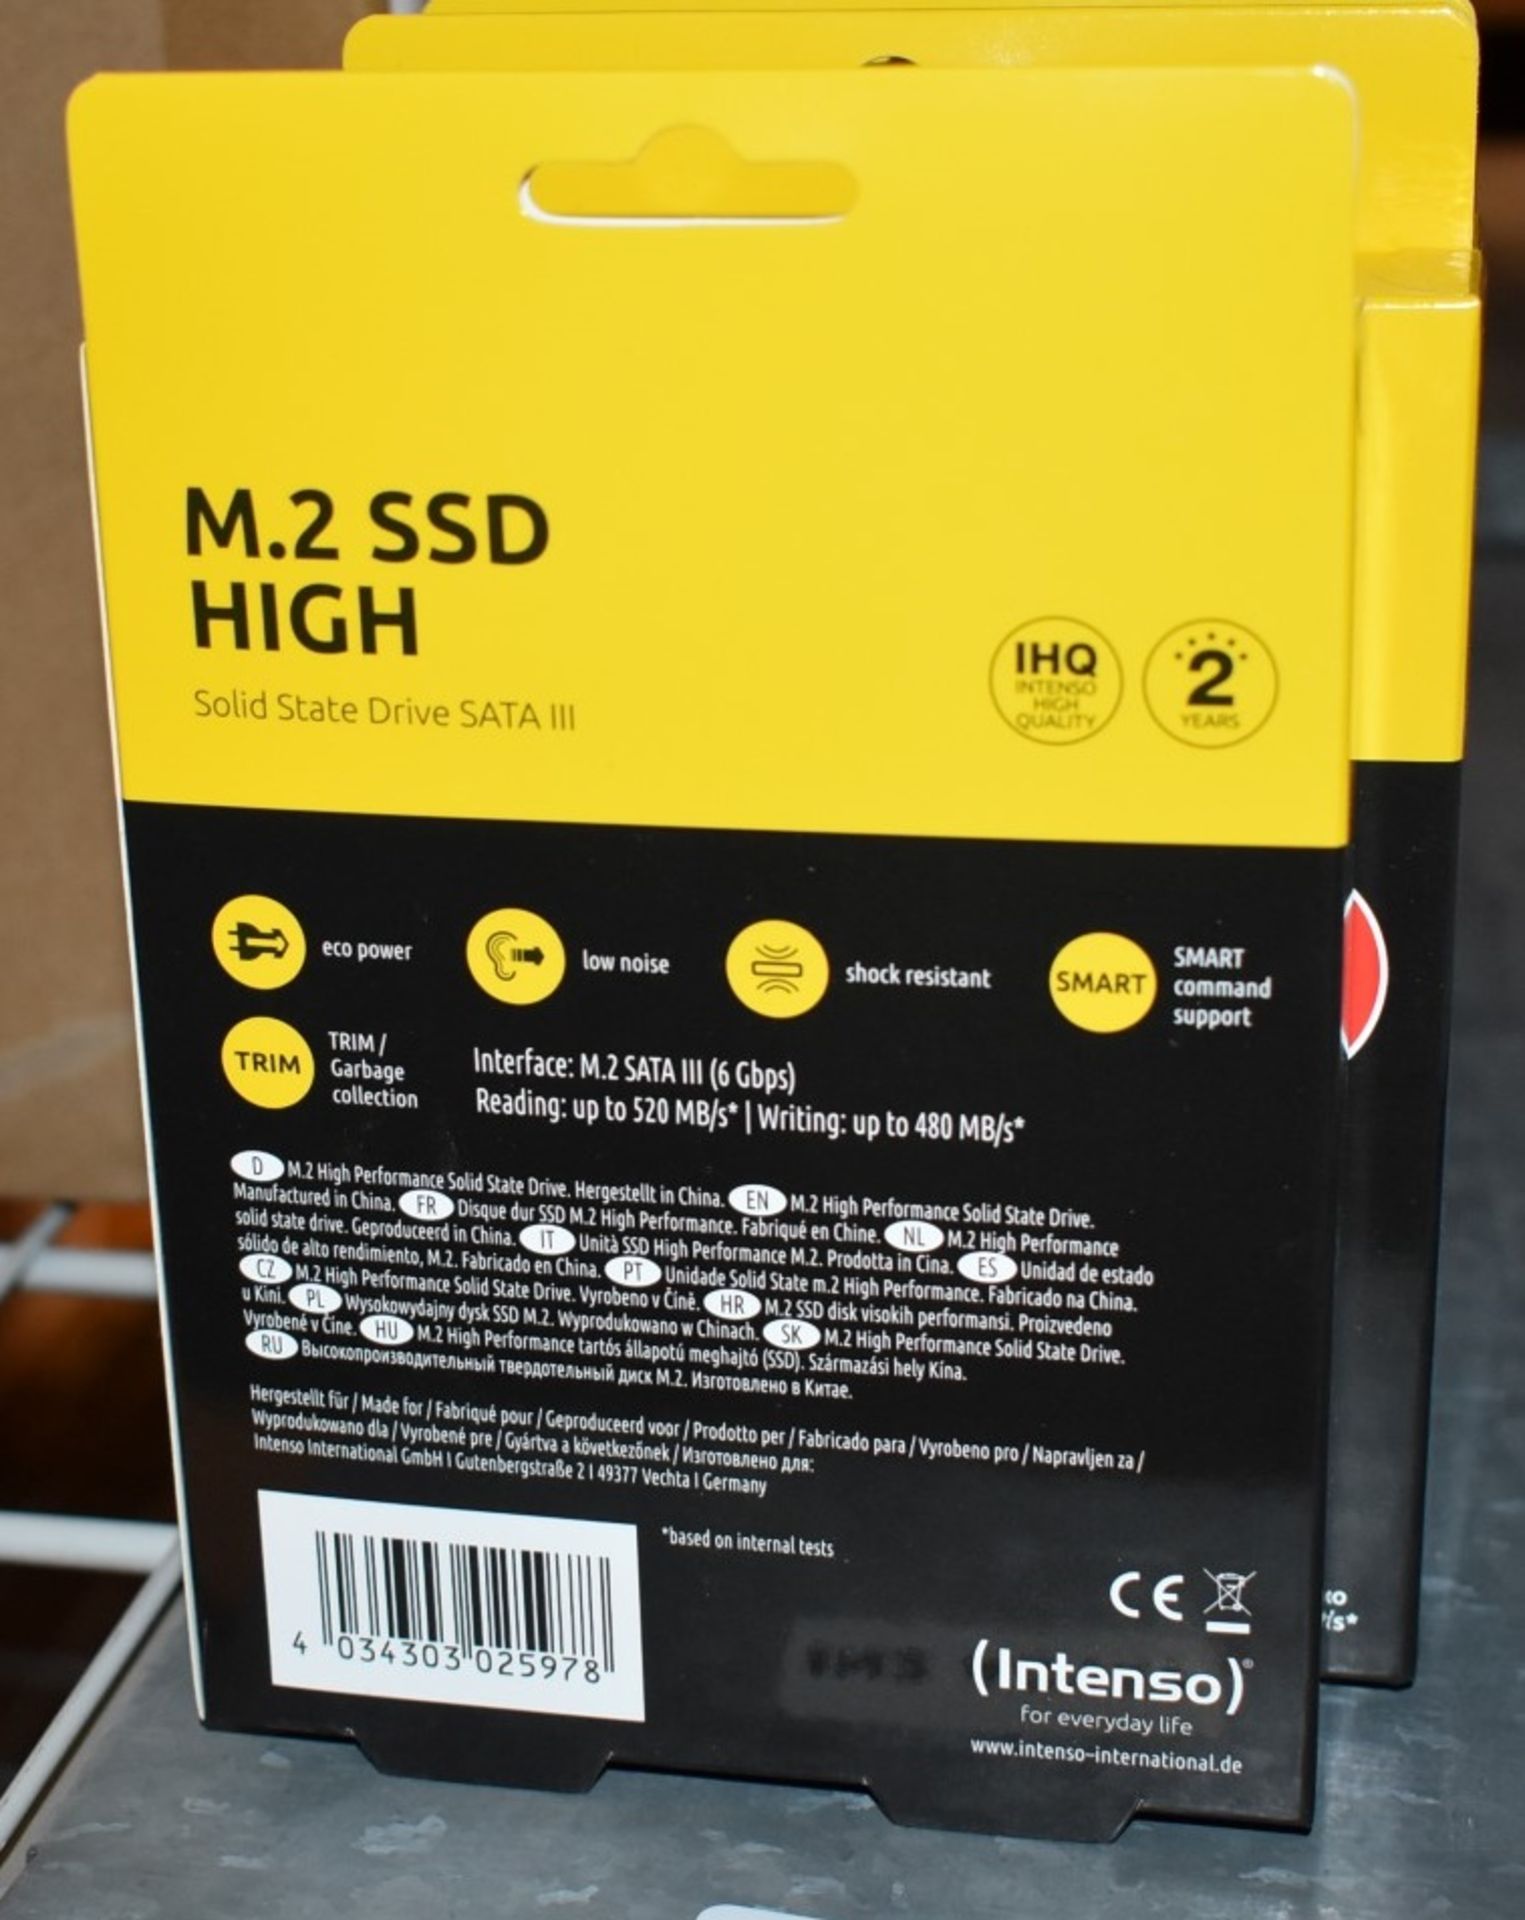 1 x Intenso M.2 Solid State 240gb SSD Hard Drive - New Boxed Stock - Ref: AC127 GFMR - CL646 - - Image 2 of 3